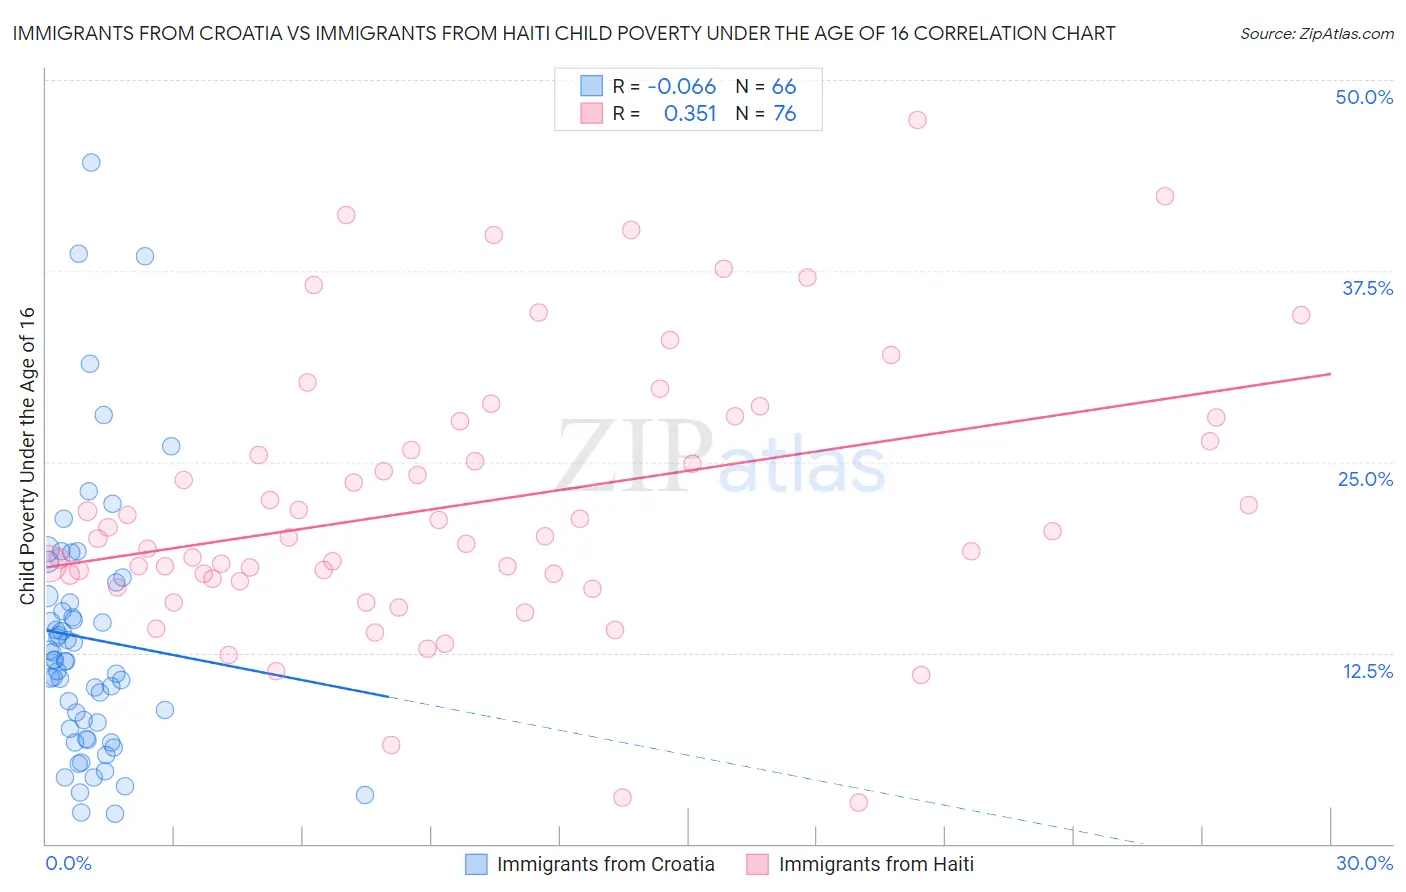 Immigrants from Croatia vs Immigrants from Haiti Child Poverty Under the Age of 16